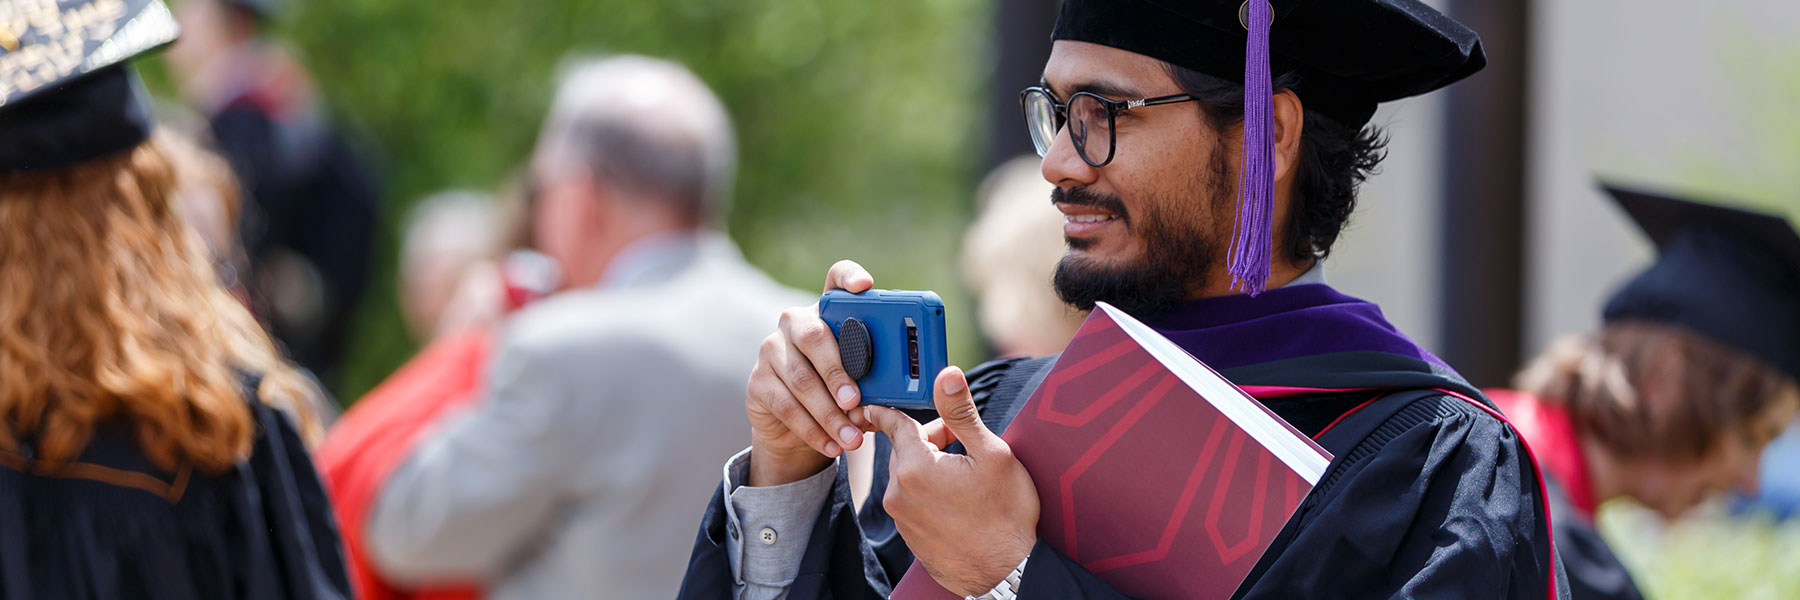 A student in commencement cap and gown holds a program booklet against his chest while holding up a phone to take a photo.